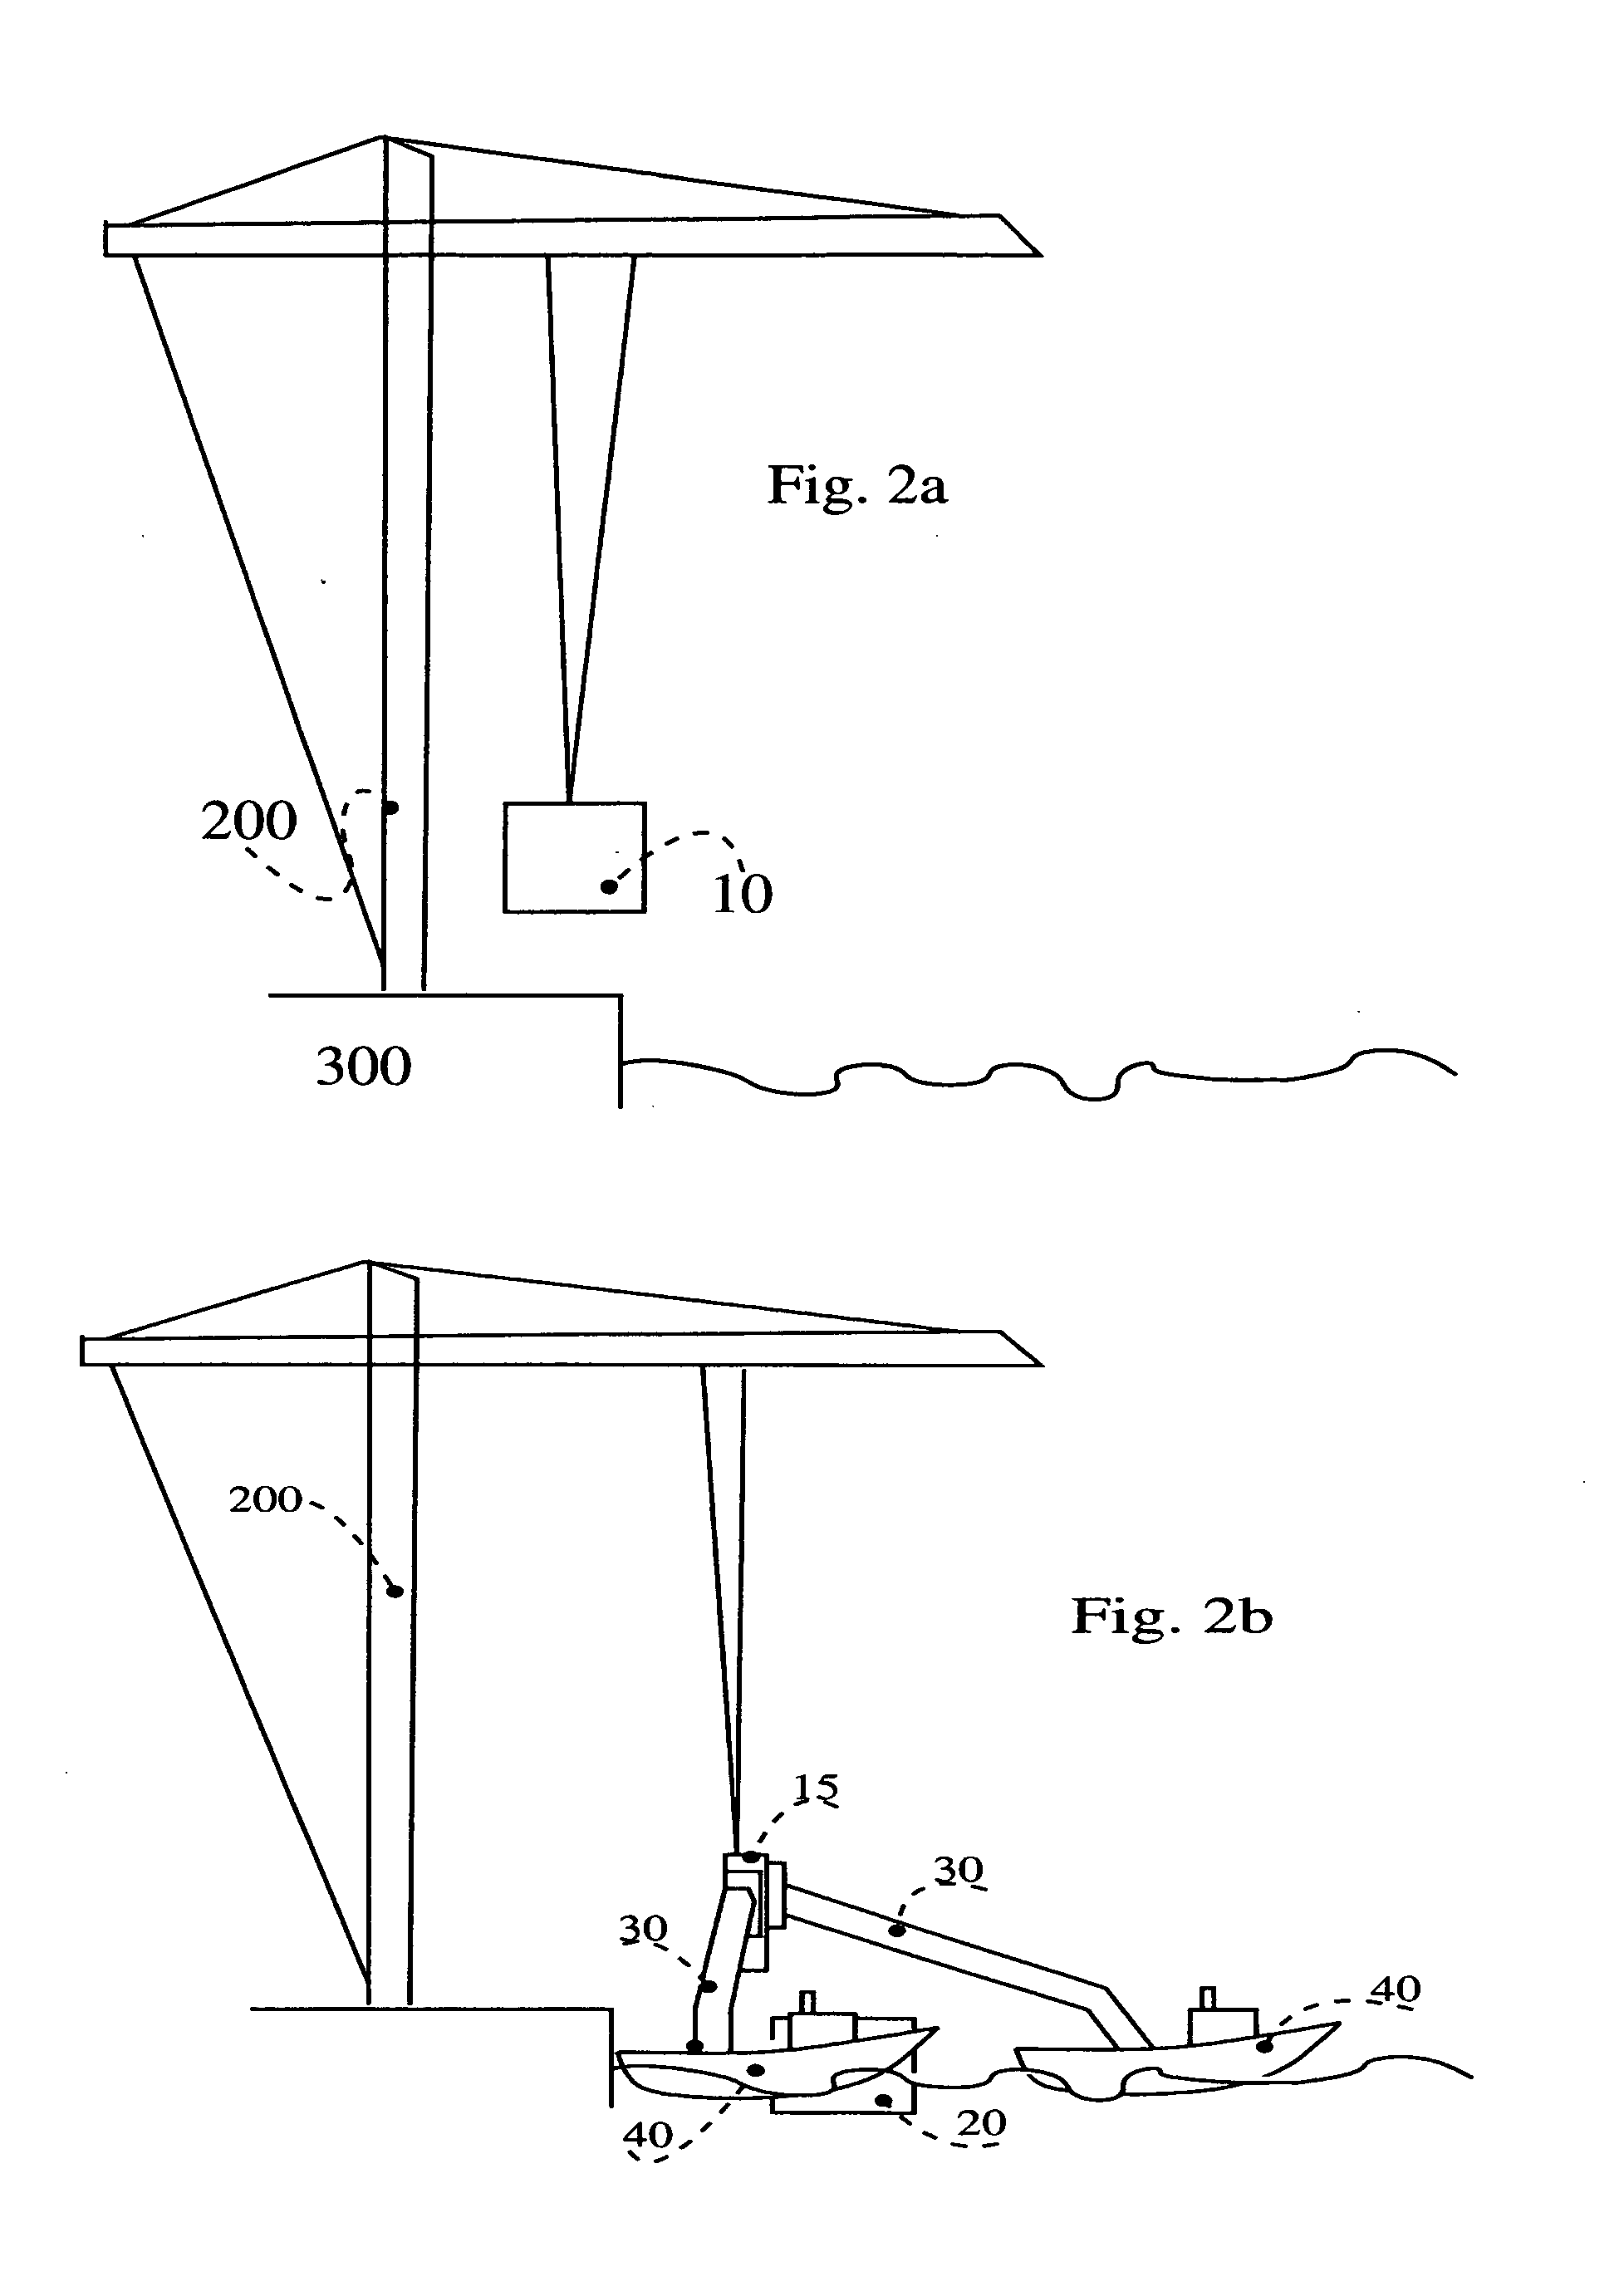 Transportation method for wind energy converters at sea